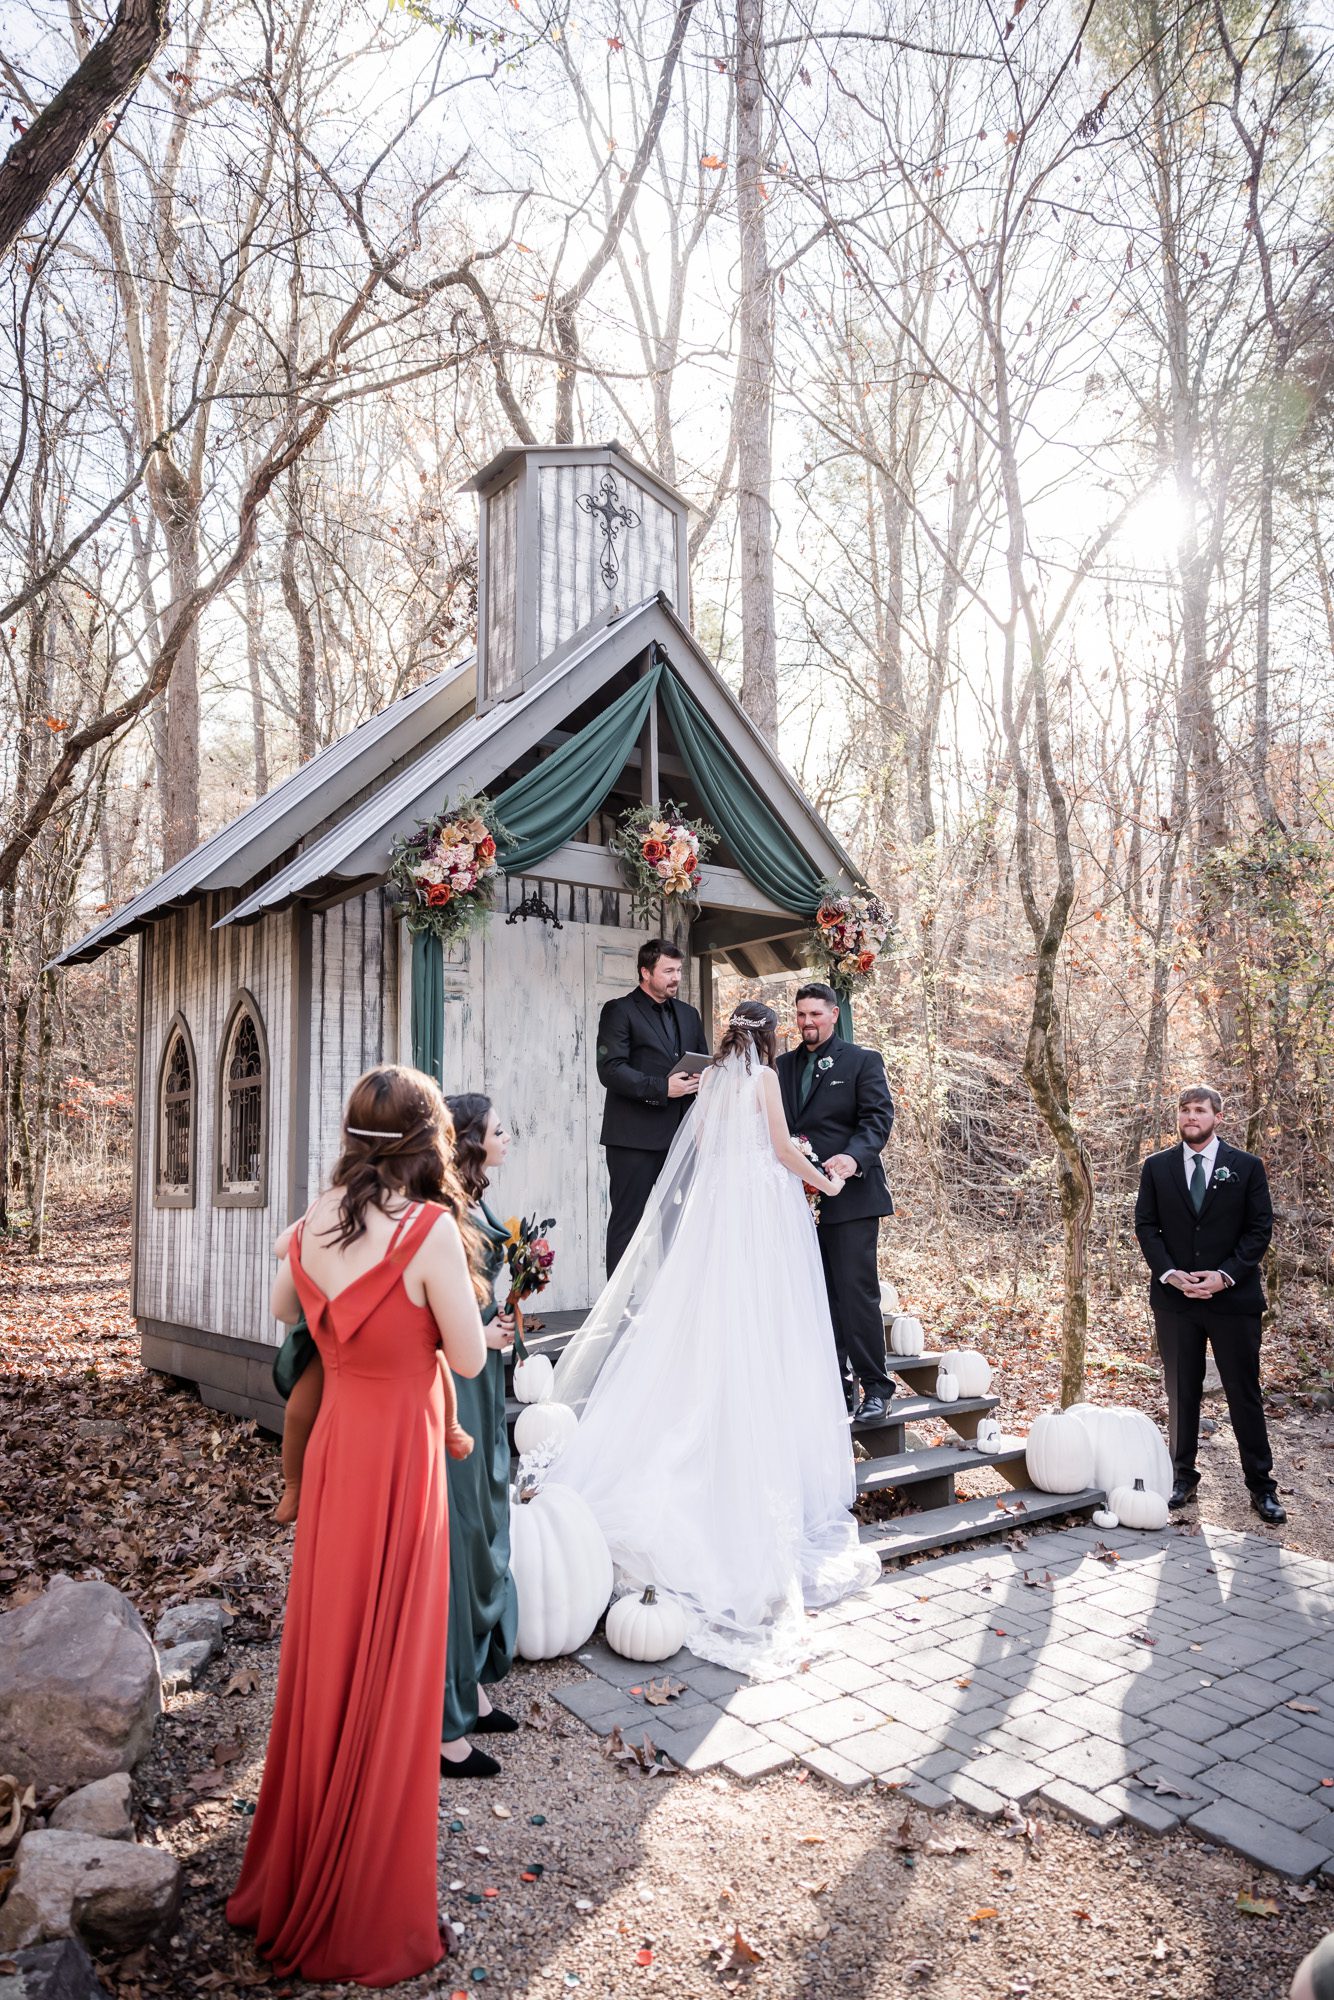 Afternoon in the woods micro wedding ceremony